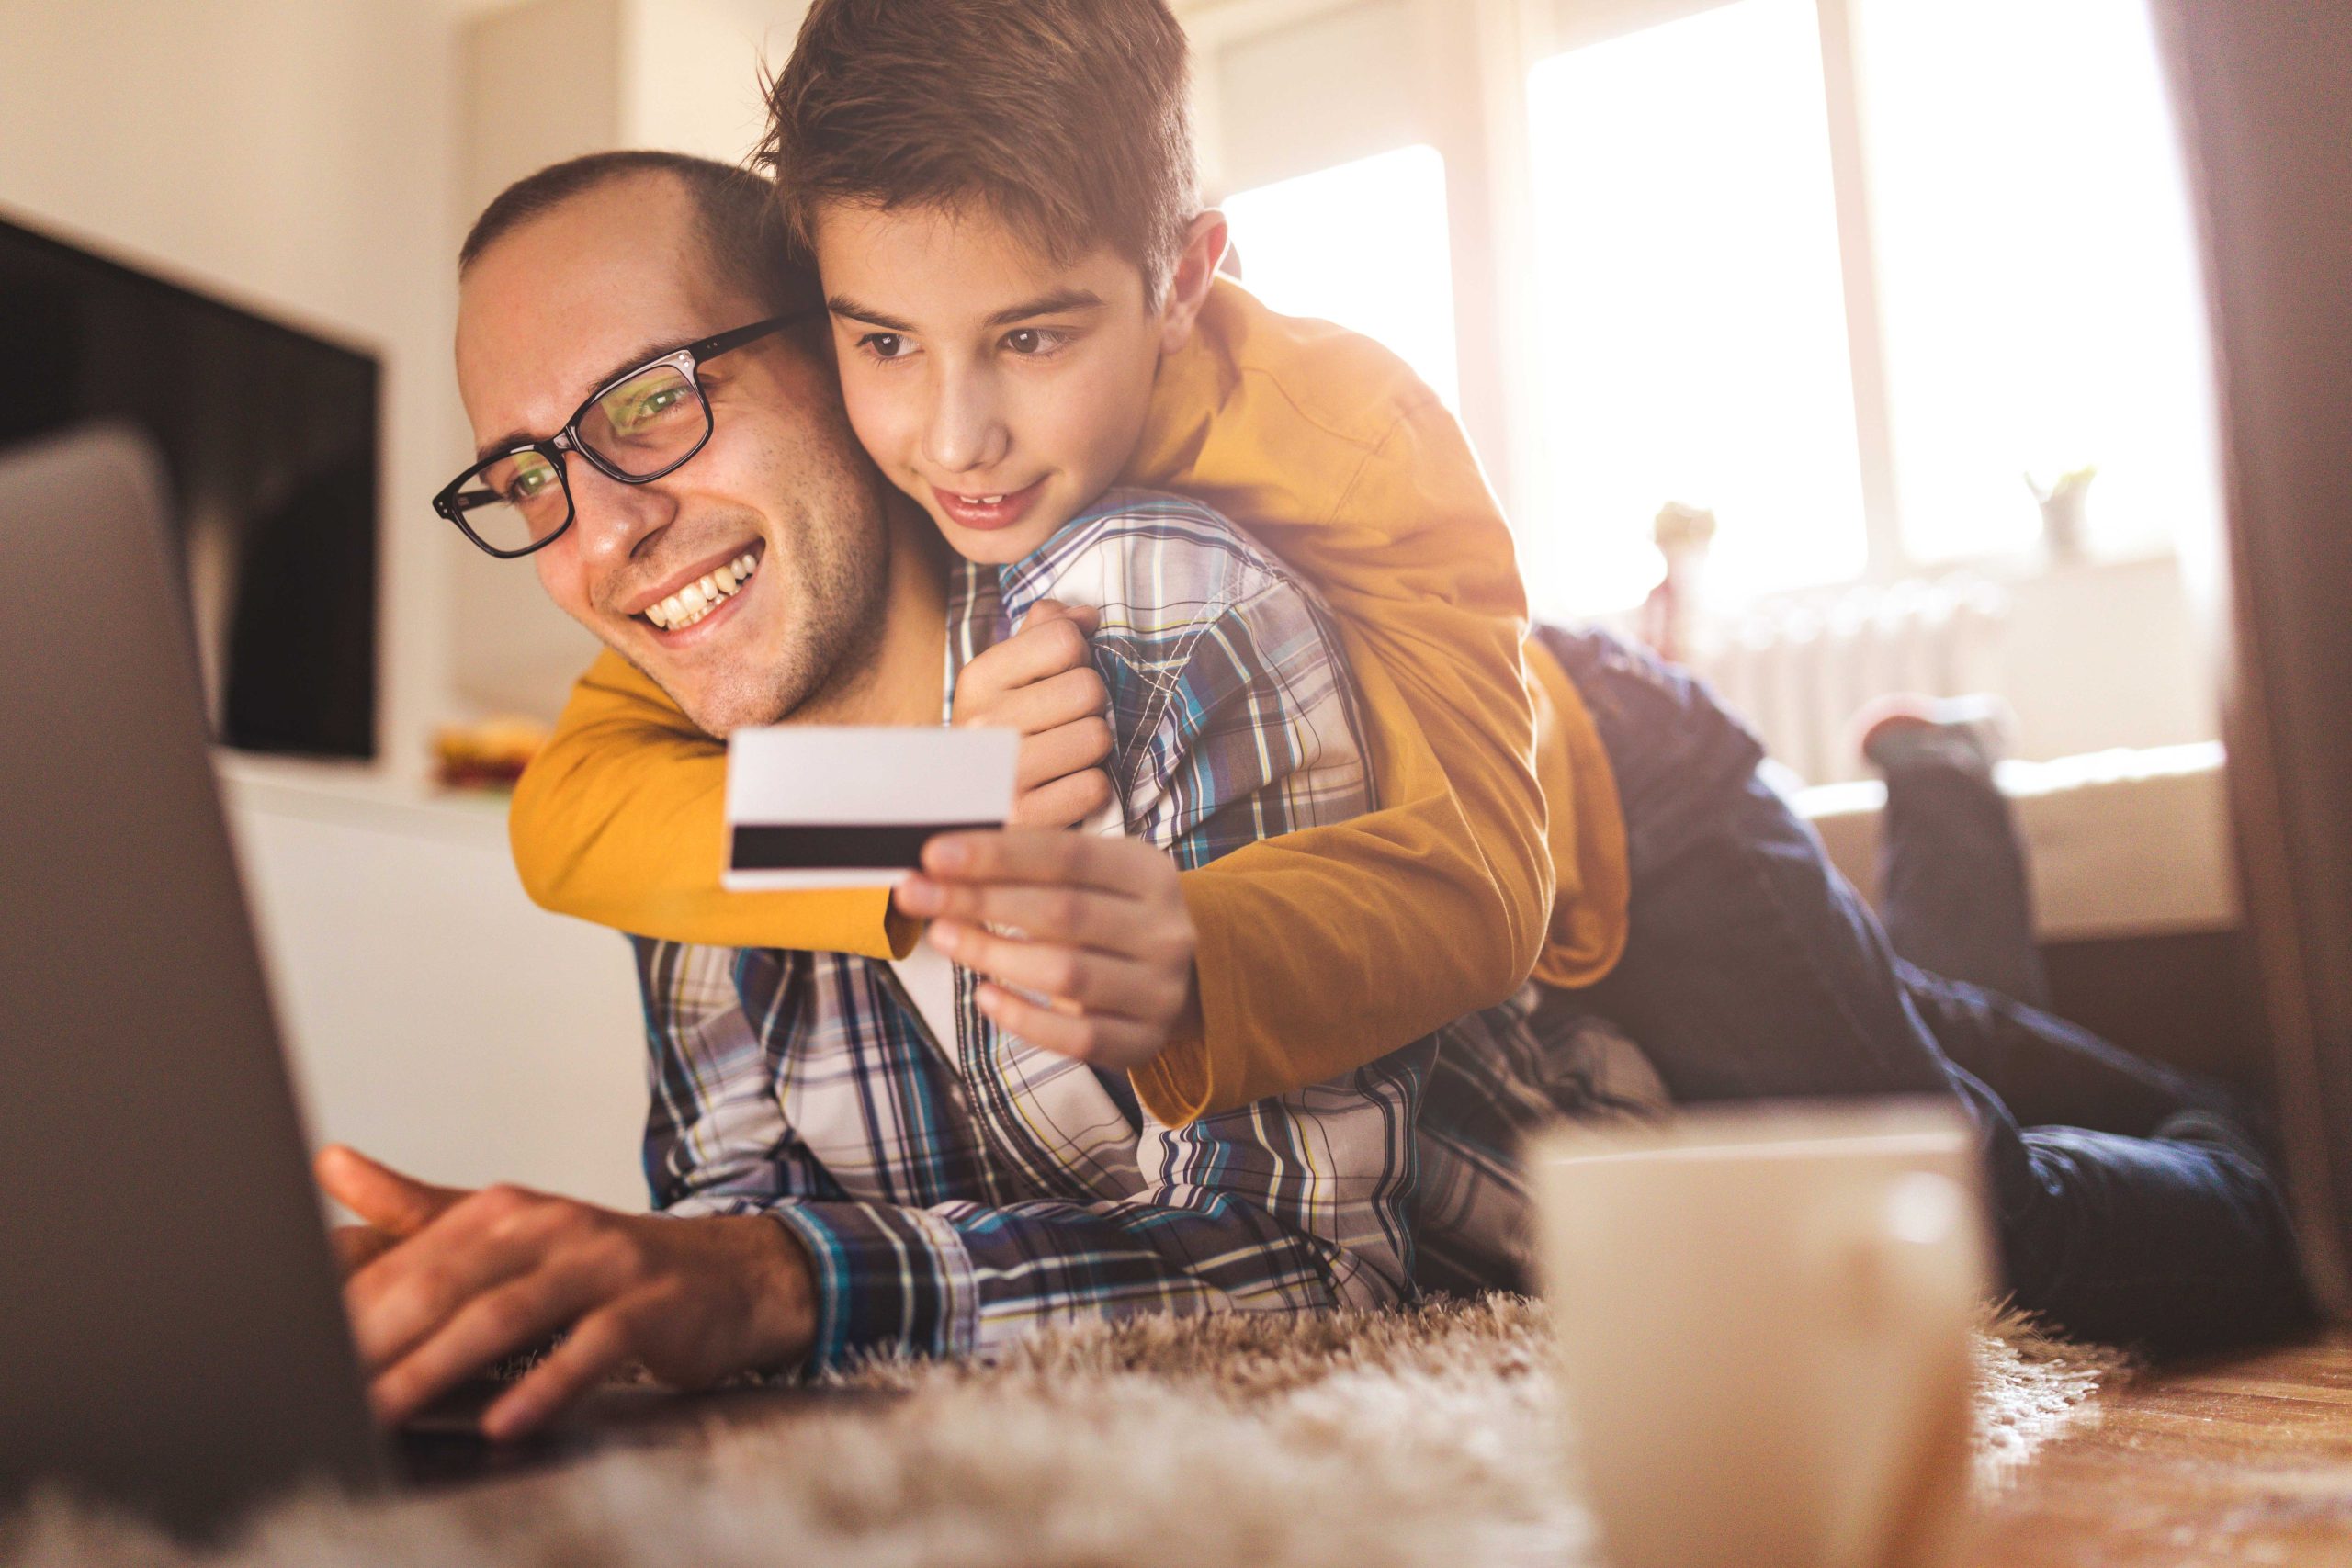 Father and son looking at a computer together while holding a debit card